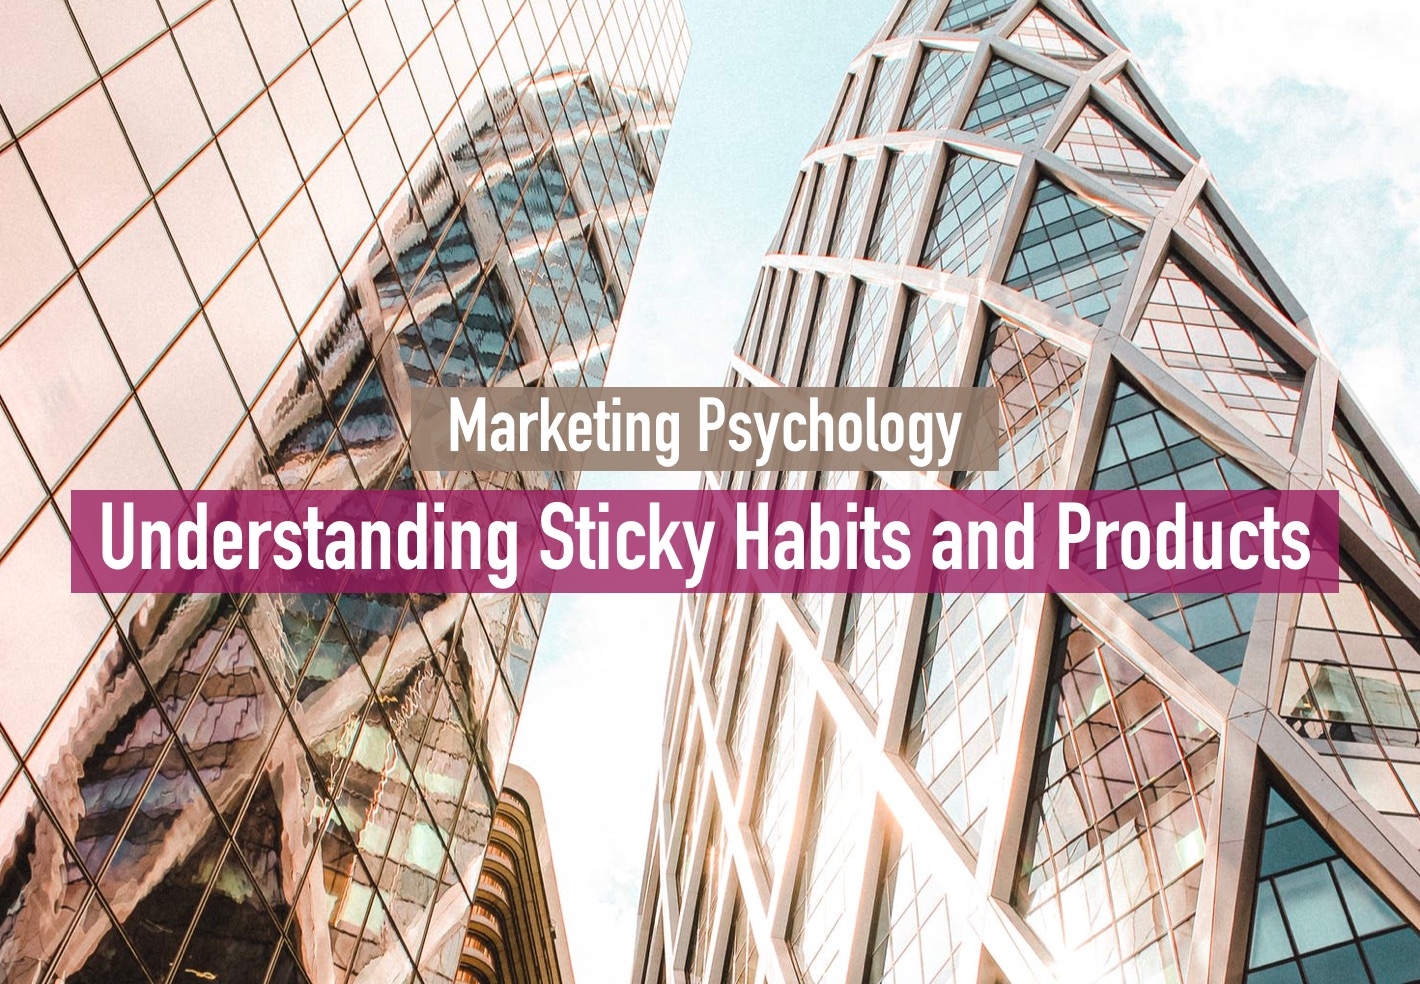 Marketing Psychology - Understanding Sticky Habits and Products